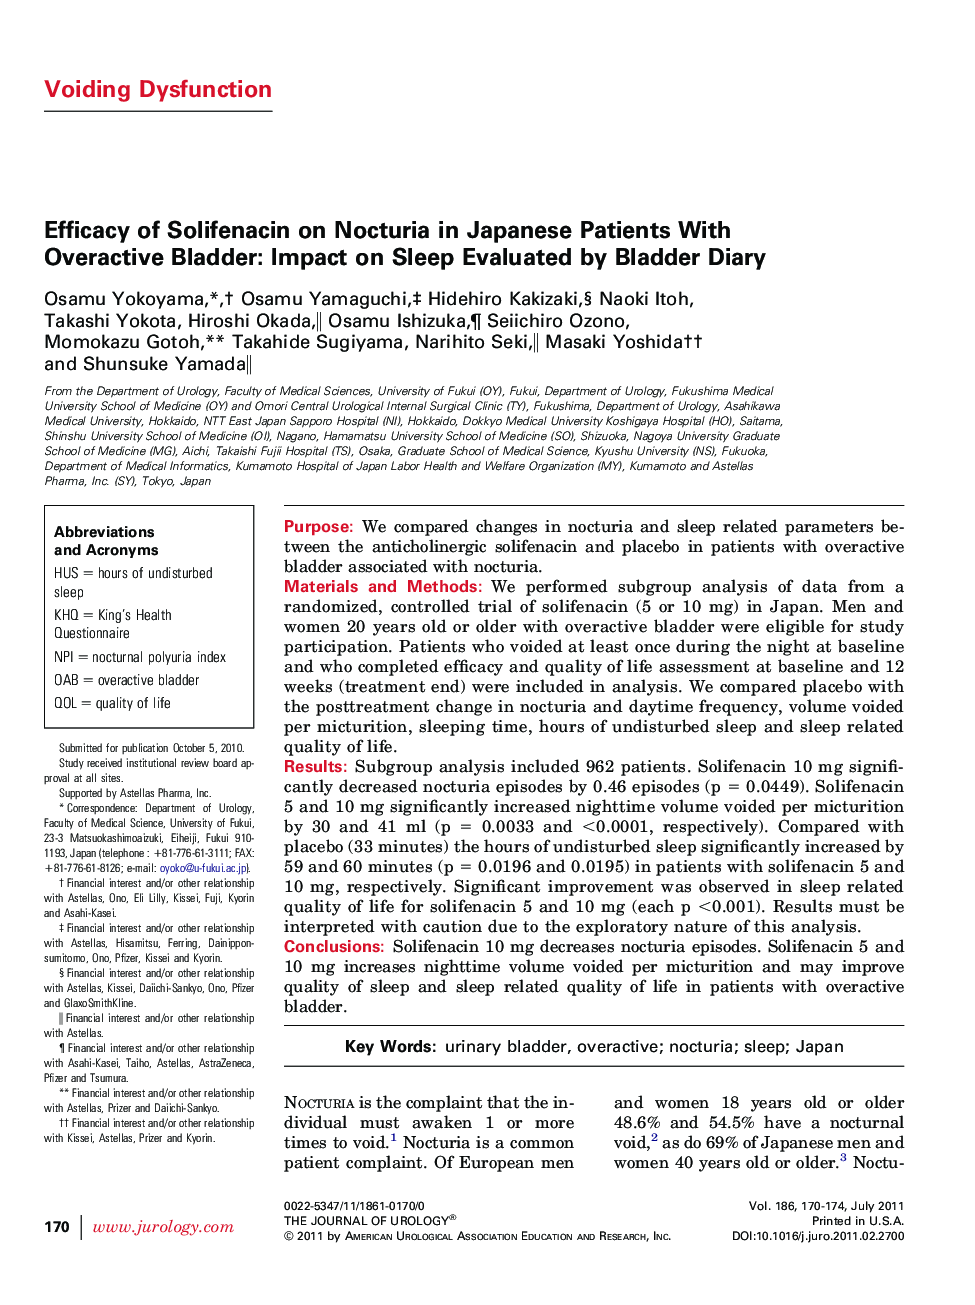 Efficacy of Solifenacin on Nocturia in Japanese Patients With Overactive Bladder: Impact on Sleep Evaluated by Bladder Diary